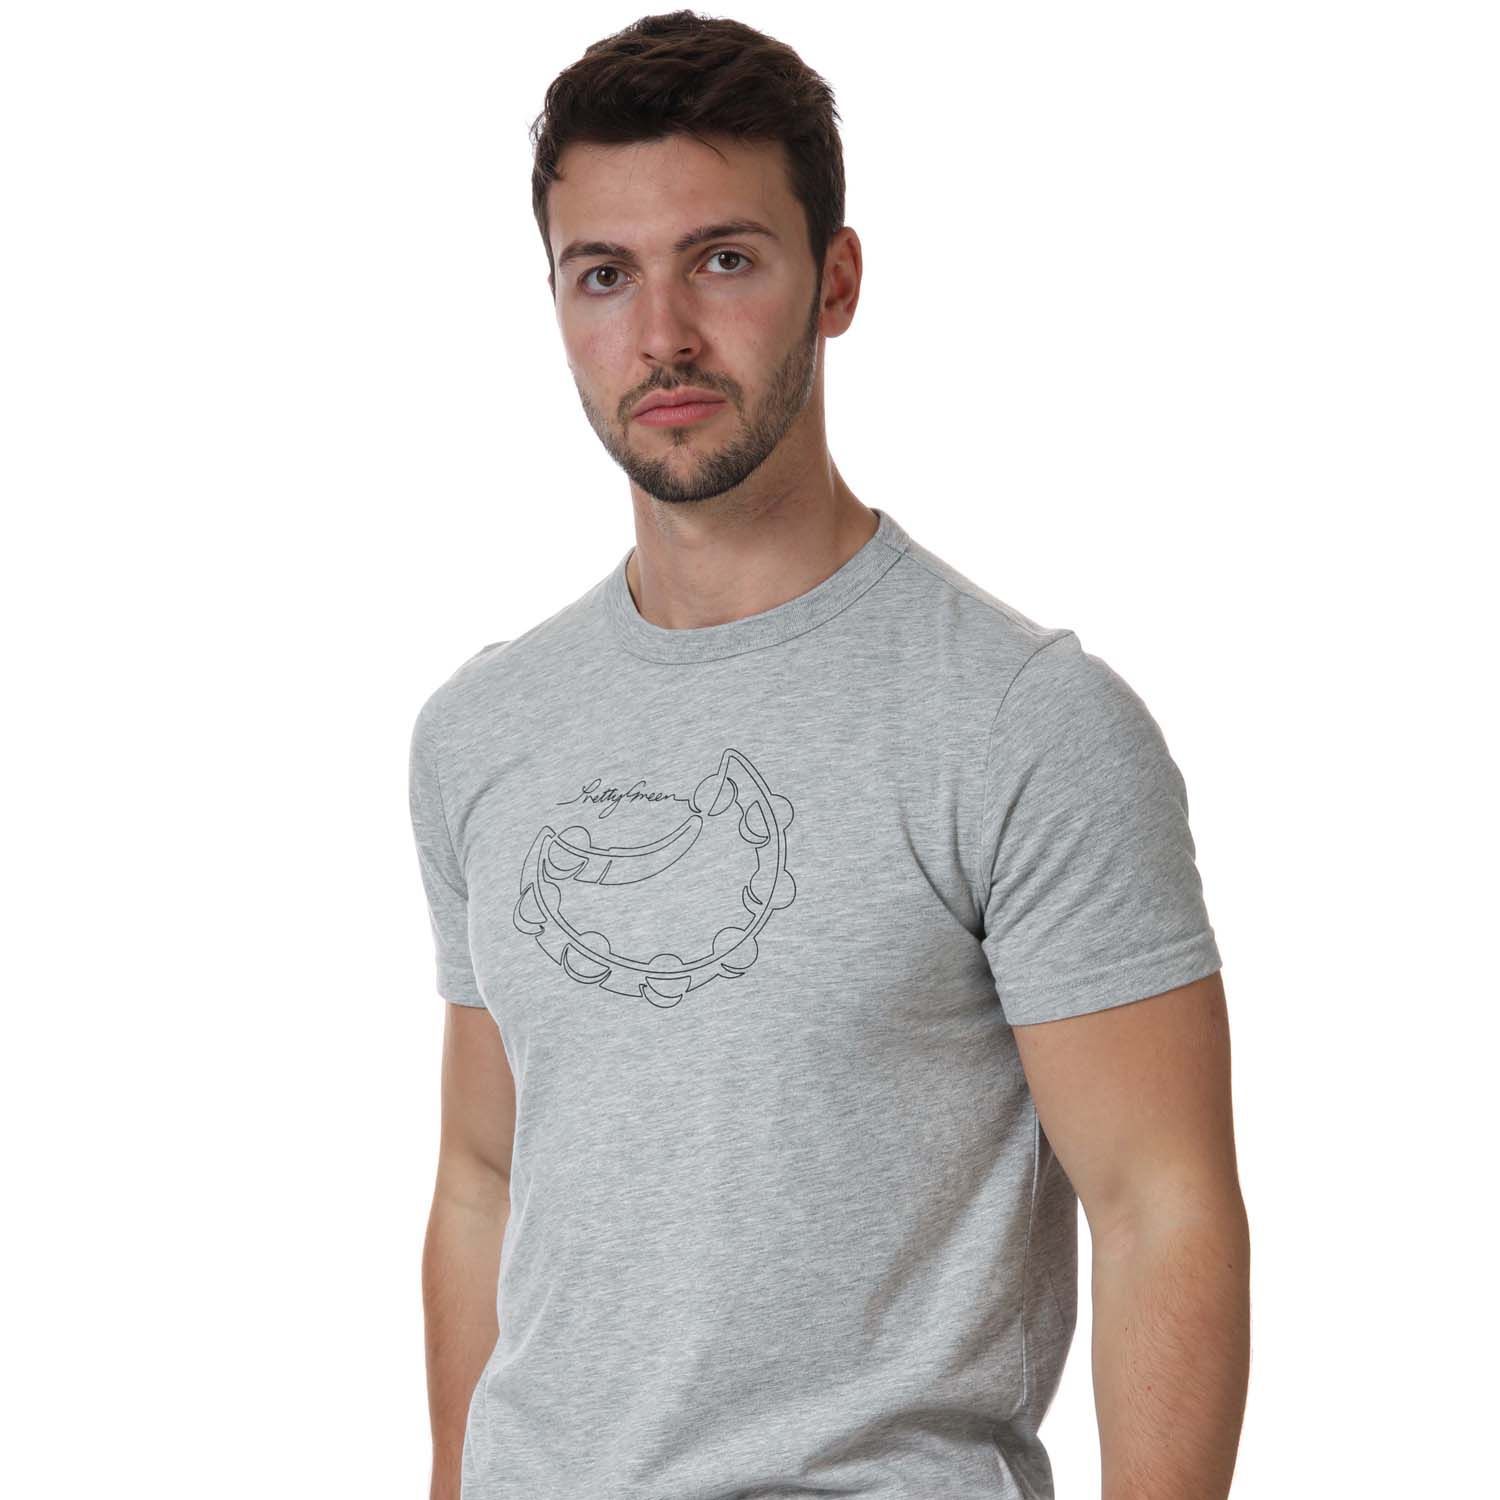 Mens Pretty Green Tambourine Print T- Shirt in grey marl.- Ribbed crew neckline.- Short sleeves.- Graphic designed.- Slim fit.- 50% Cotton  50% Polyester.  Machine wash at 30 degrees.- Ref: G21Q3MUJER979